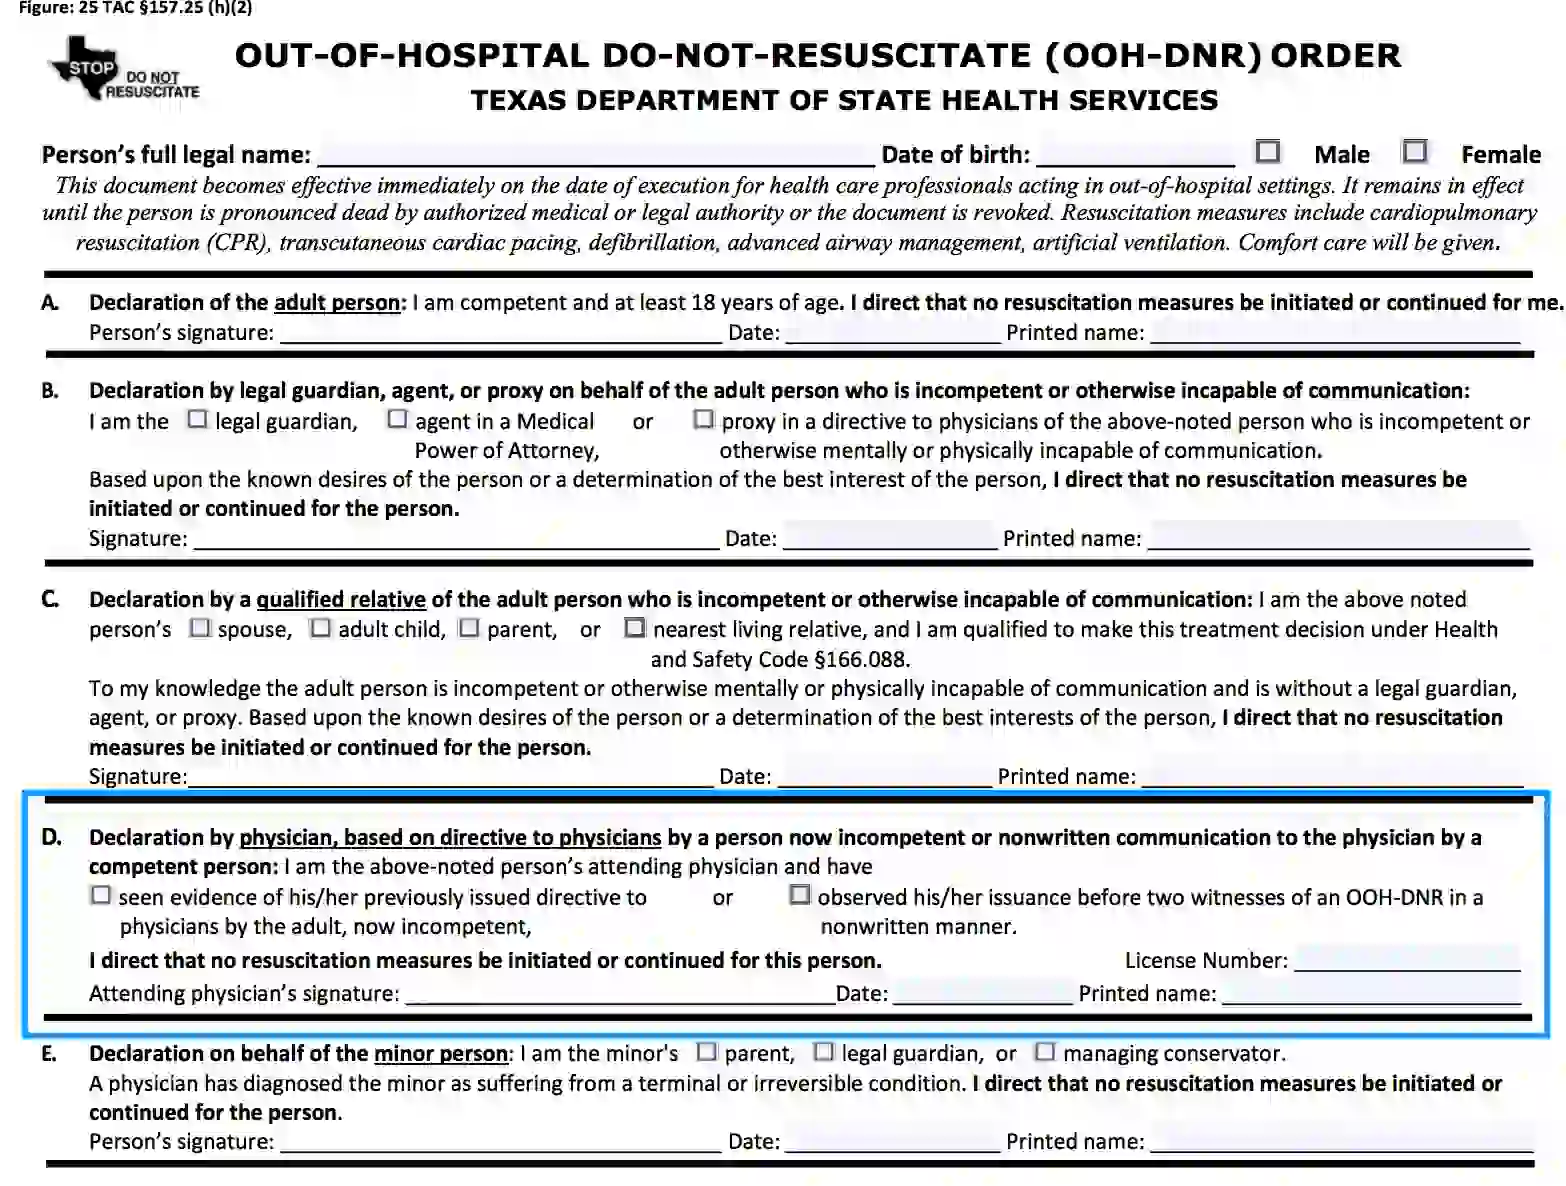 step 2.4 to filling out the texas dnr form - confirm a declaration